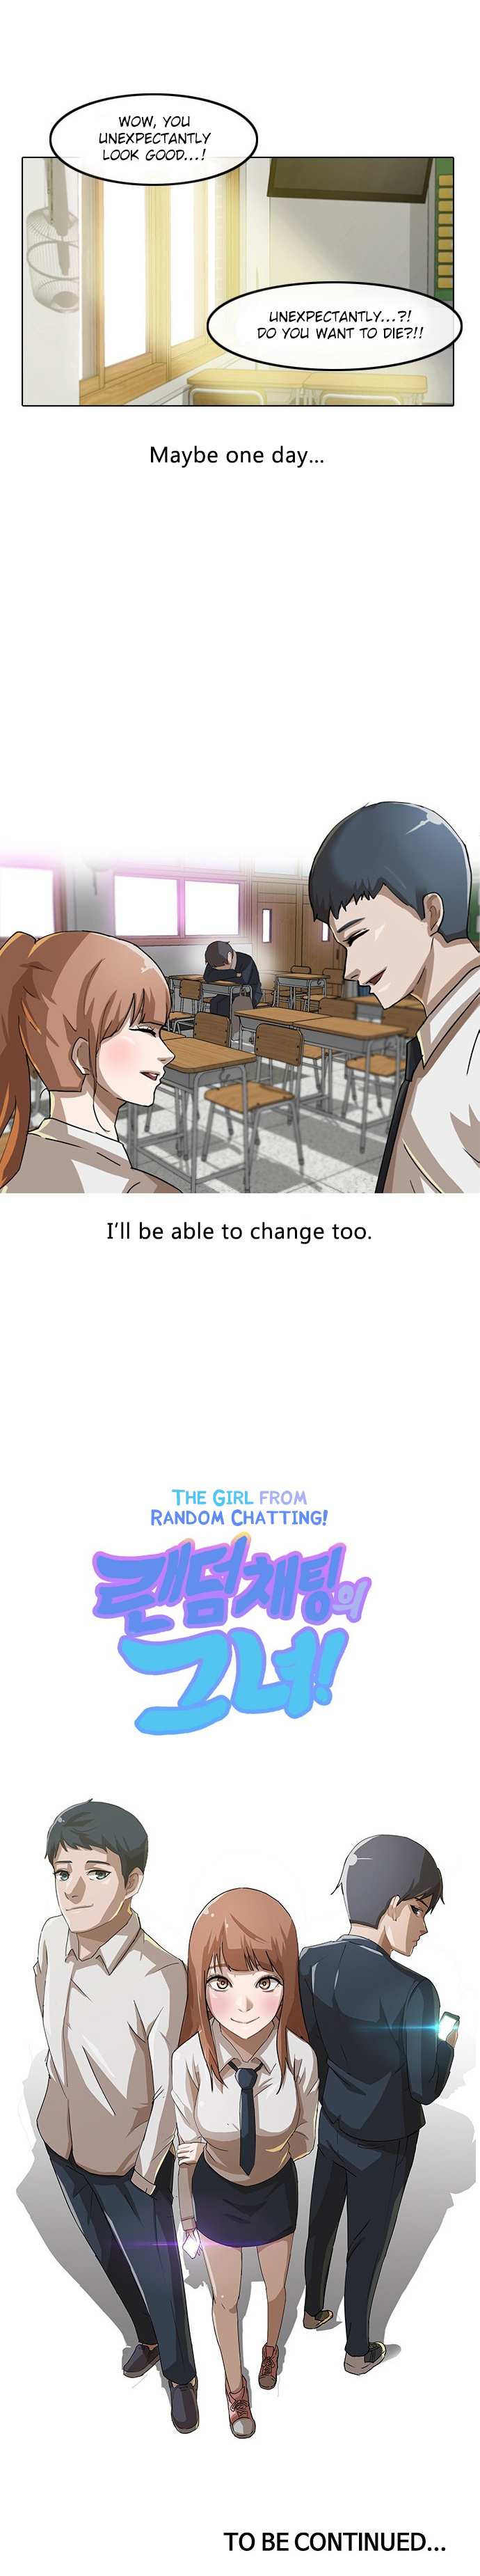 The Girl from Random Chatting chapter 3 - page 13